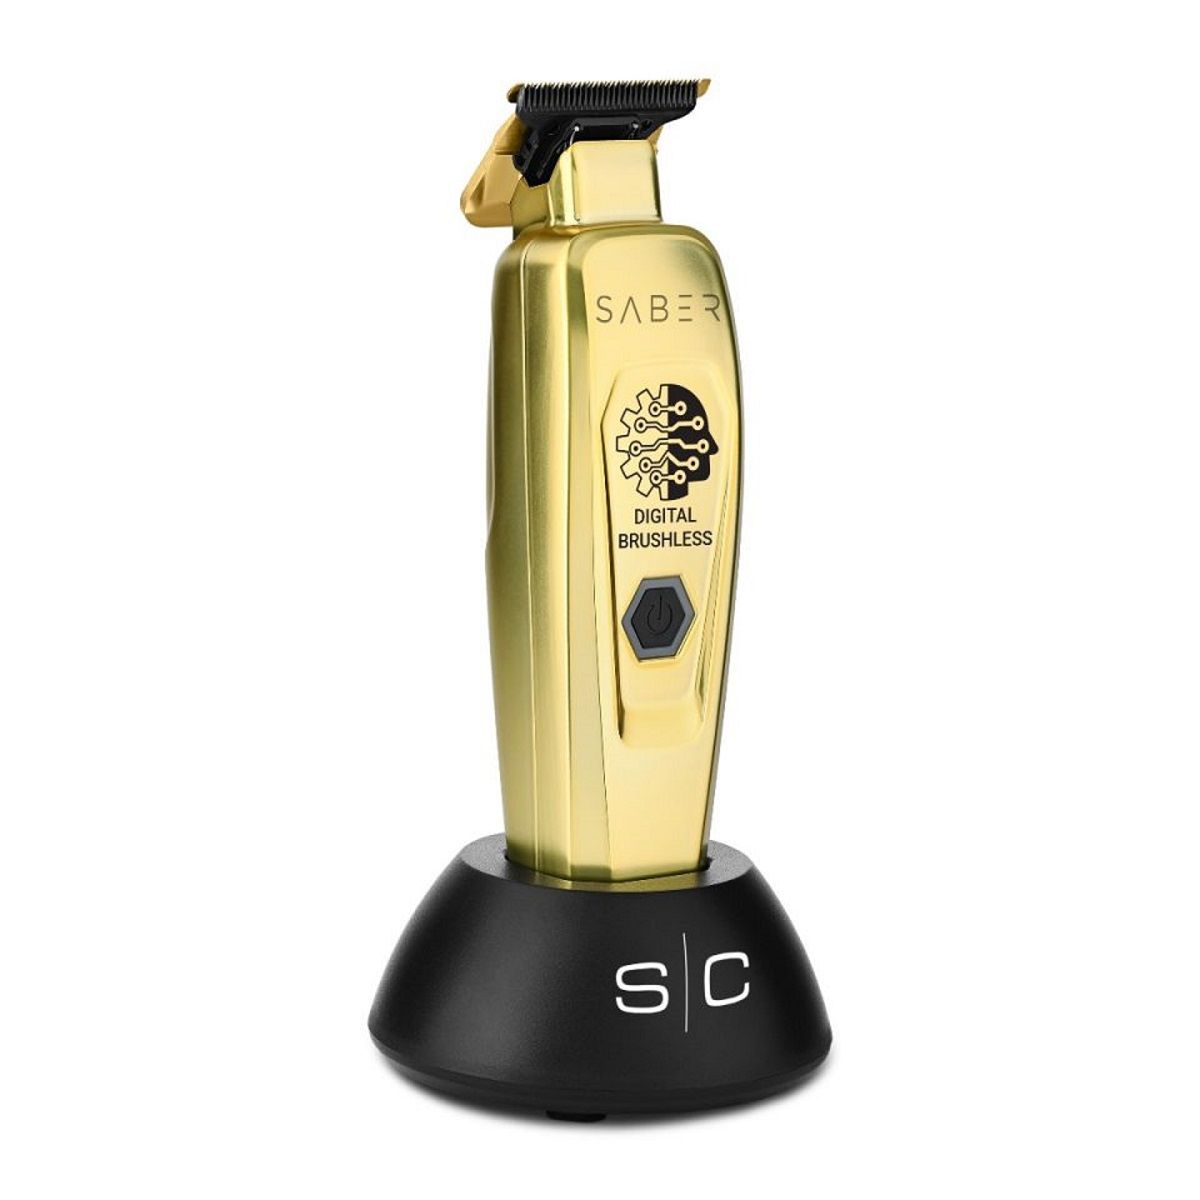 Stylecraft Pro Saber Metal Trimmer with Brushless Motor - Gold Tondeuse de Finition (Dual Voltage)